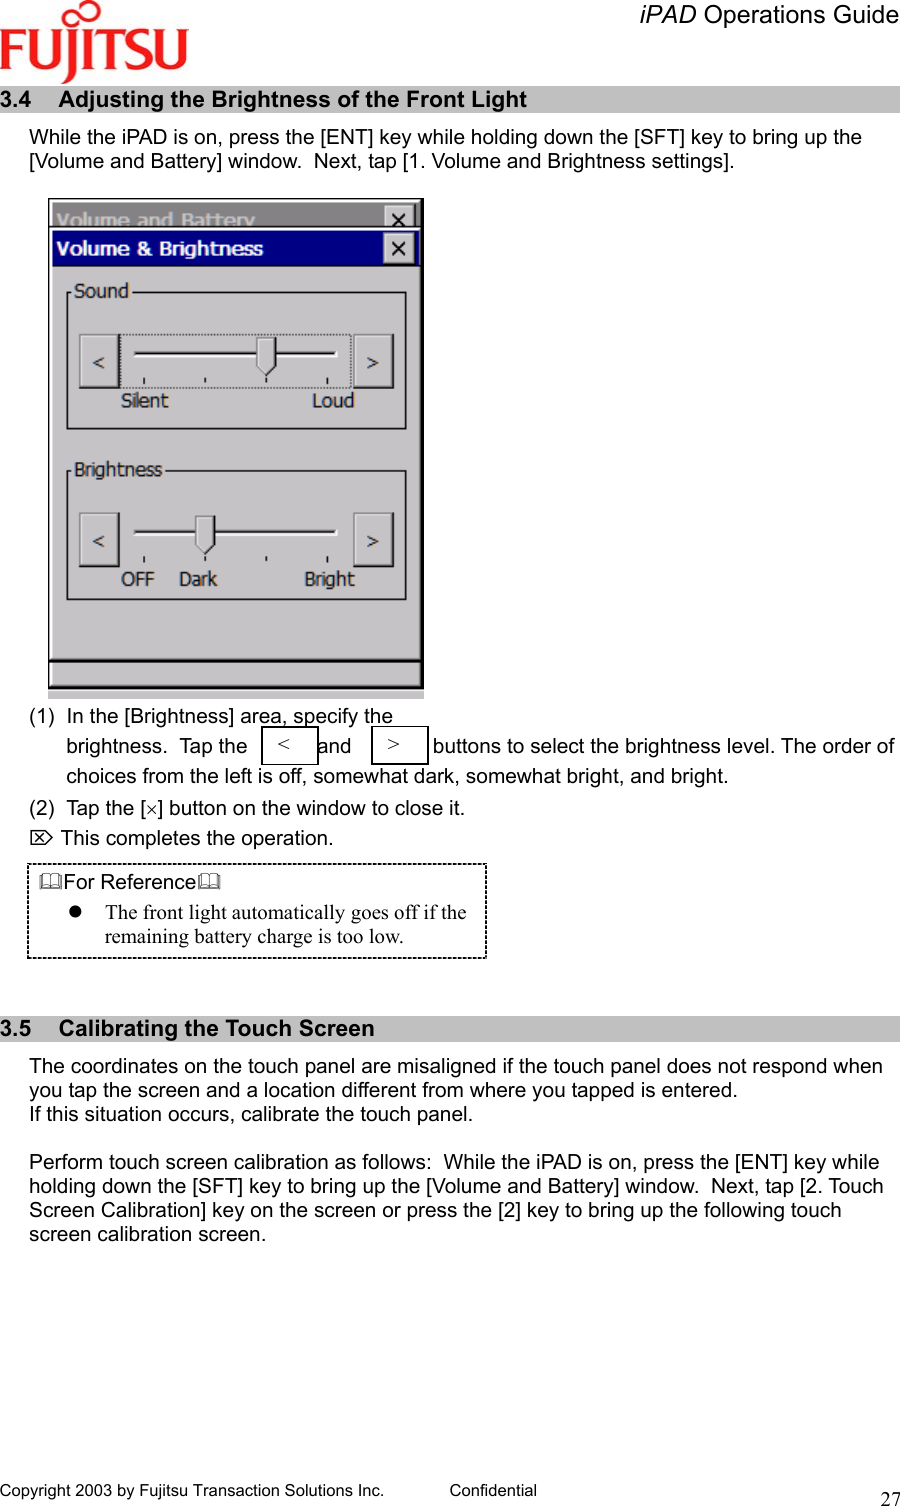   iPAD Operations Guide   Copyright 2003 by Fujitsu Transaction Solutions Inc. Confidential  273.4  Adjusting the Brightness of the Front Light While the iPAD is on, press the [ENT] key while holding down the [SFT] key to bring up the [Volume and Battery] window.  Next, tap [1. Volume and Brightness settings].  (1)  In the [Brightness] area, specify the  brightness.  Tap the            and              buttons to select the brightness level. The order of  choices from the left is off, somewhat dark, somewhat bright, and bright. (2)  Tap the [×] button on the window to close it. ⌦ This completes the operation. For Reference  The front light automatically goes off if the remaining battery charge is too low.   3.5  Calibrating the Touch Screen The coordinates on the touch panel are misaligned if the touch panel does not respond when you tap the screen and a location different from where you tapped is entered. If this situation occurs, calibrate the touch panel.  Perform touch screen calibration as follows:  While the iPAD is on, press the [ENT] key while holding down the [SFT] key to bring up the [Volume and Battery] window.  Next, tap [2. Touch Screen Calibration] key on the screen or press the [2] key to bring up the following touch screen calibration screen.  &lt;  &gt;